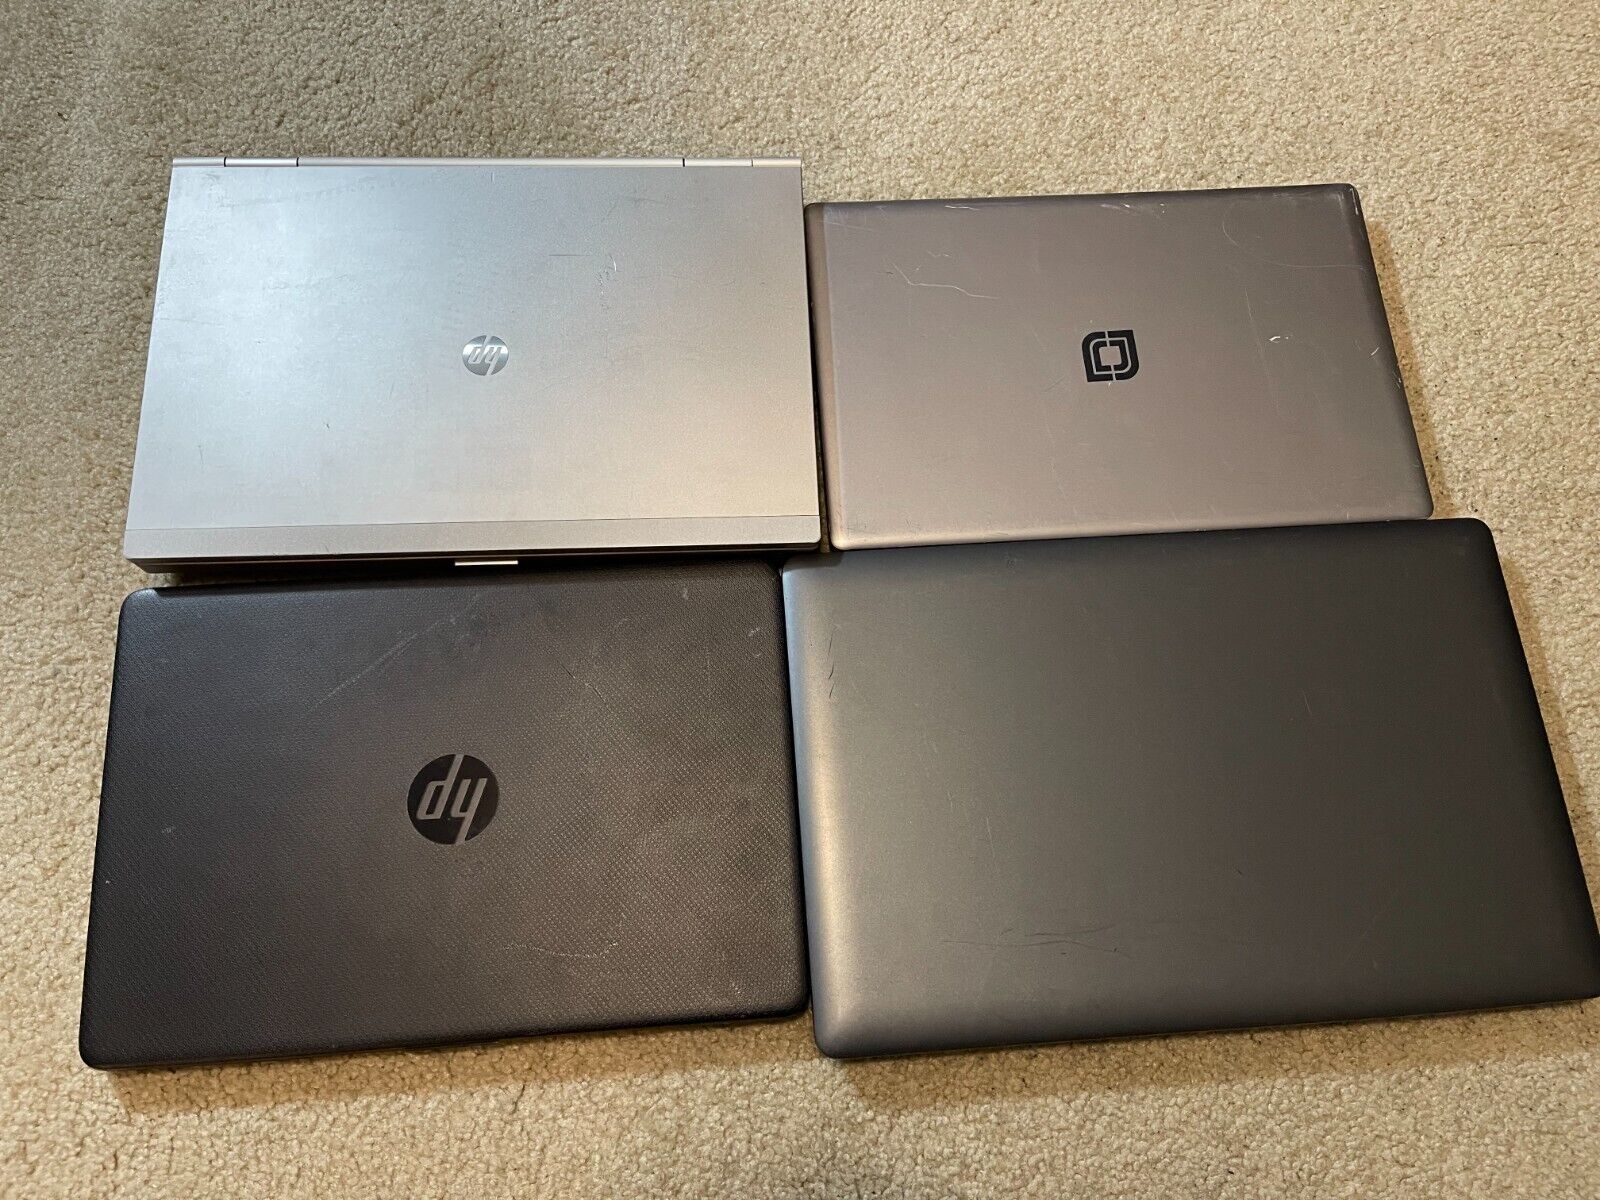 Lot of 4 laptops - 2x HP, 2x Misc -  Untested As Is